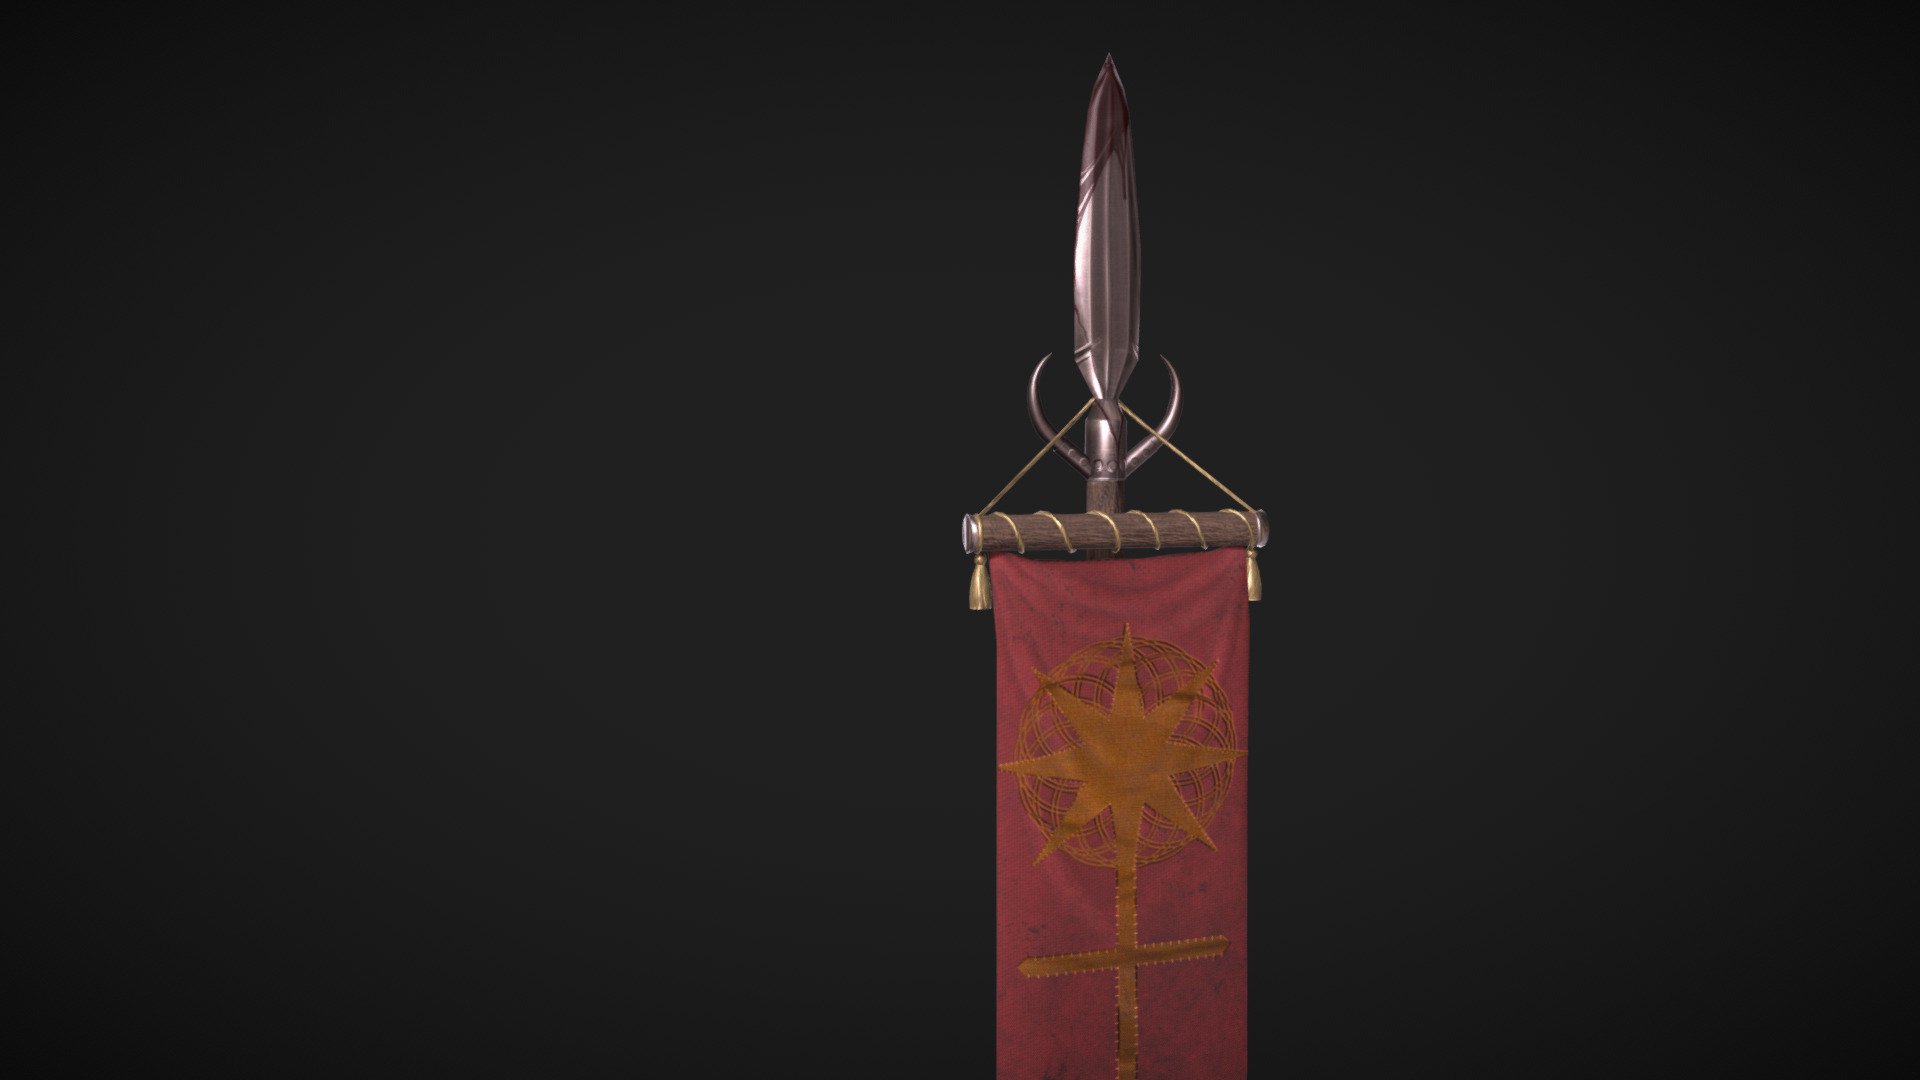 Low poly medieval lance and banner made for a Game Assets class project 3d model